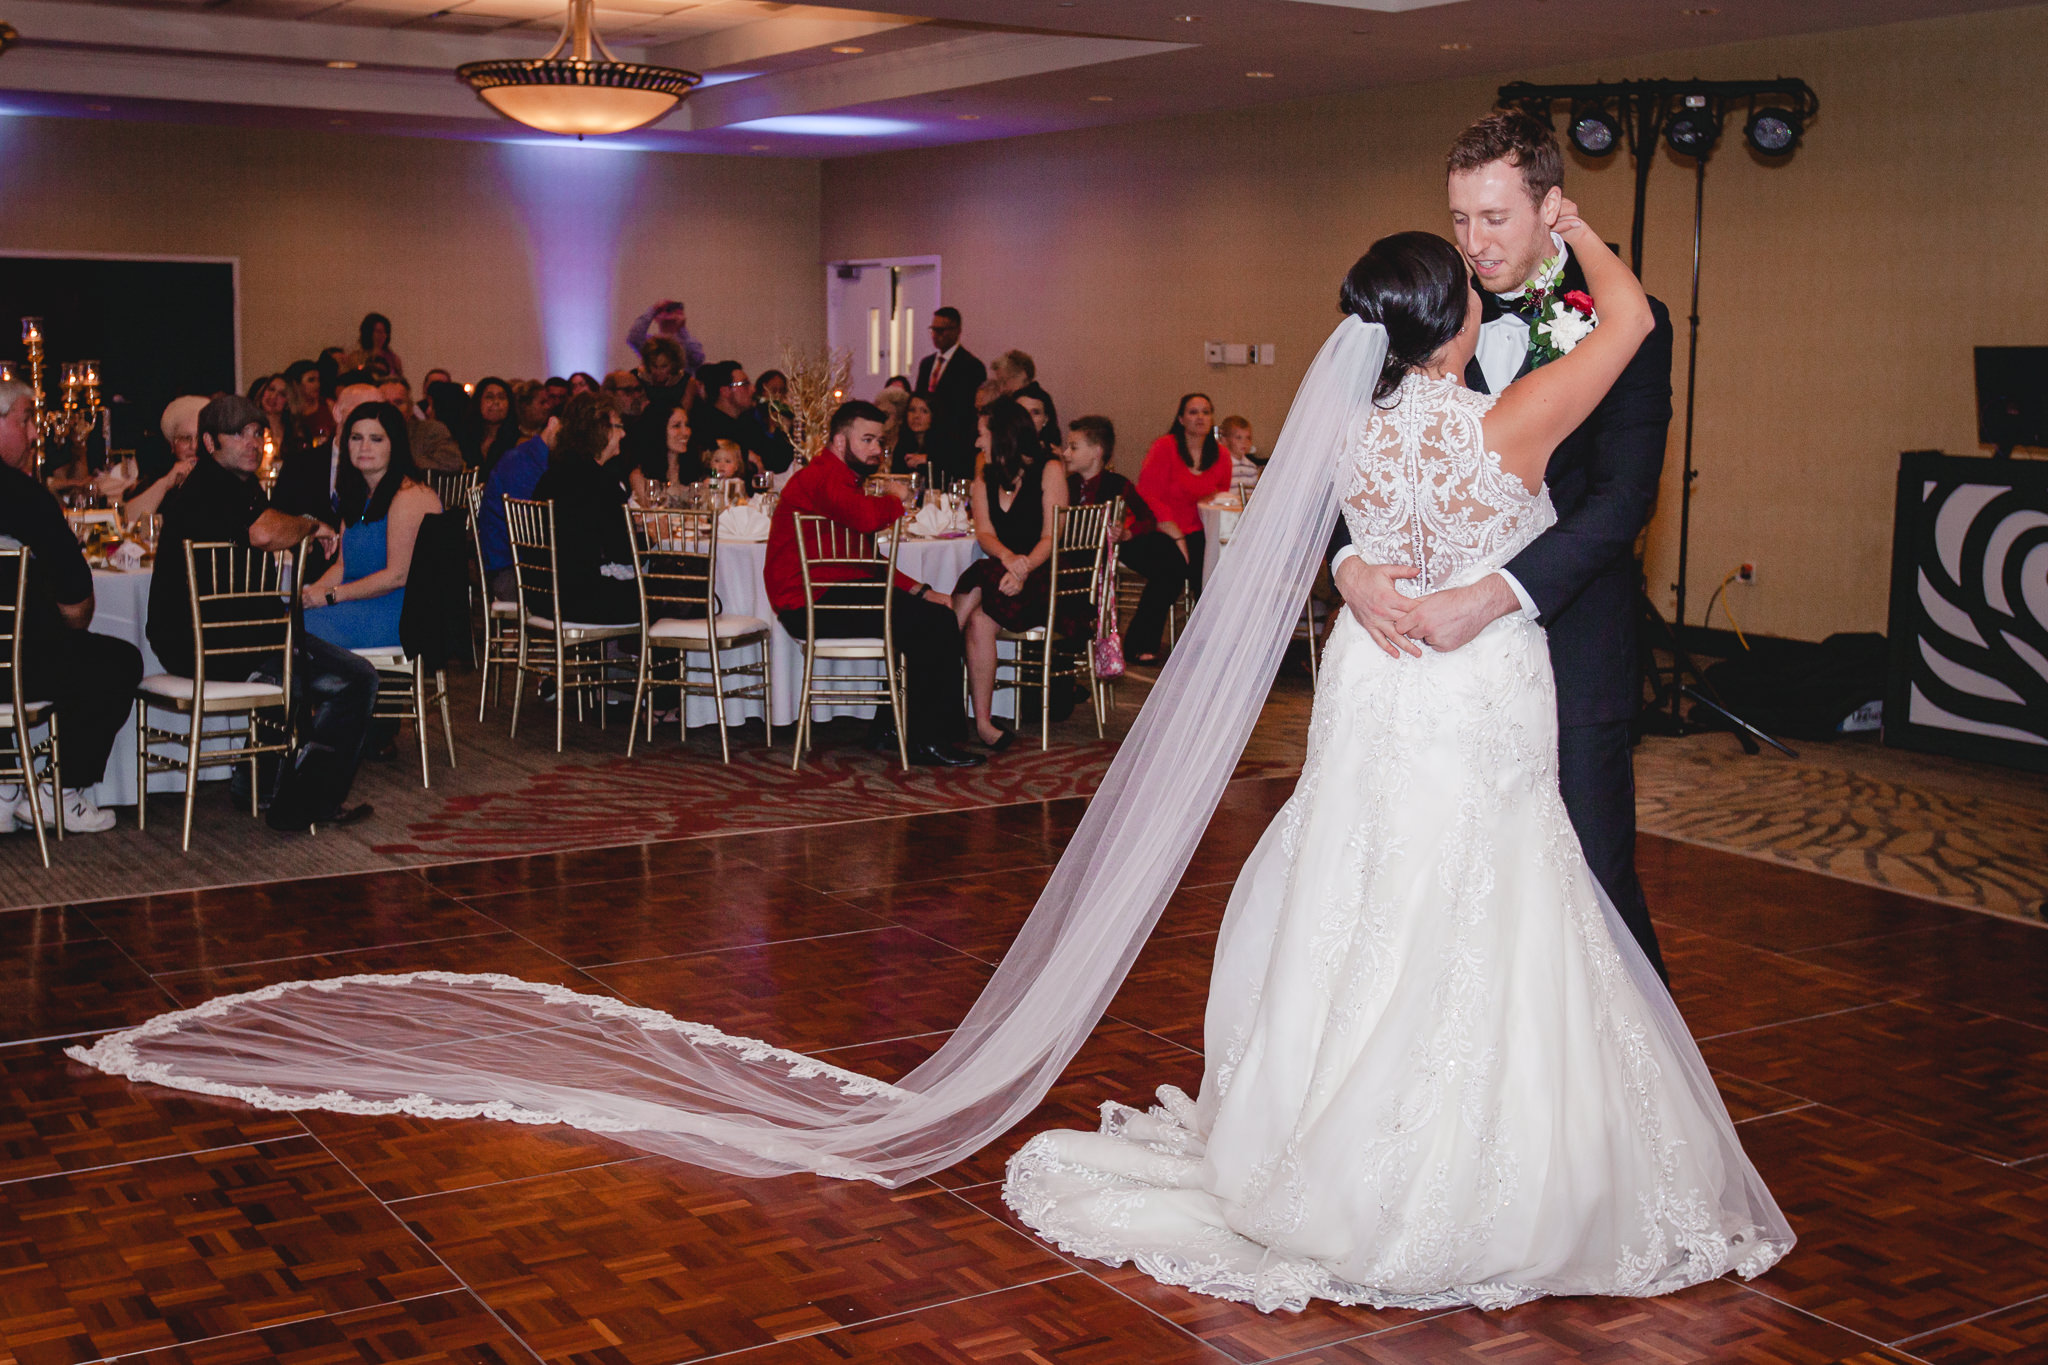 Bride and groom's first dance at DoubleTree Pittsburgh Airport with cathedral veil spread out